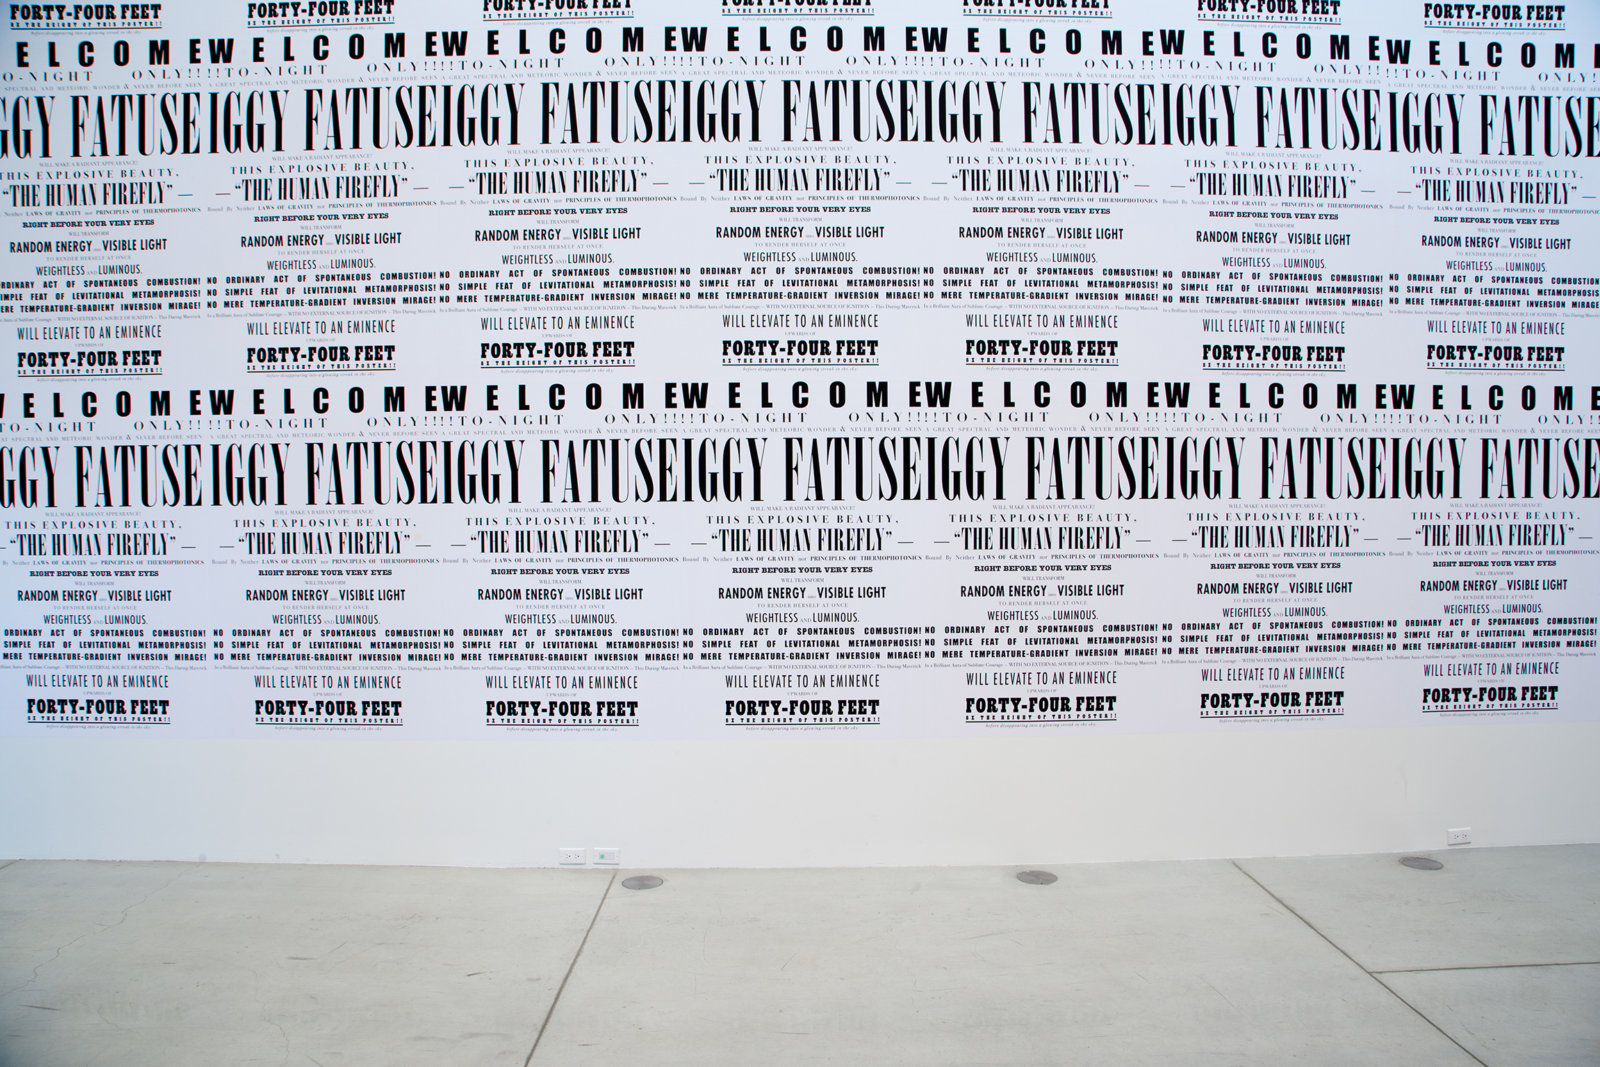 Janice Kerbel, Remarkable: Iggy Fatuse, The Human Firefly, 2007, silkscreen print on campaign poster paper, dimensions variable. Installation view, Elevated, Art Gallery of Ontario, Toronto, ON, 2014